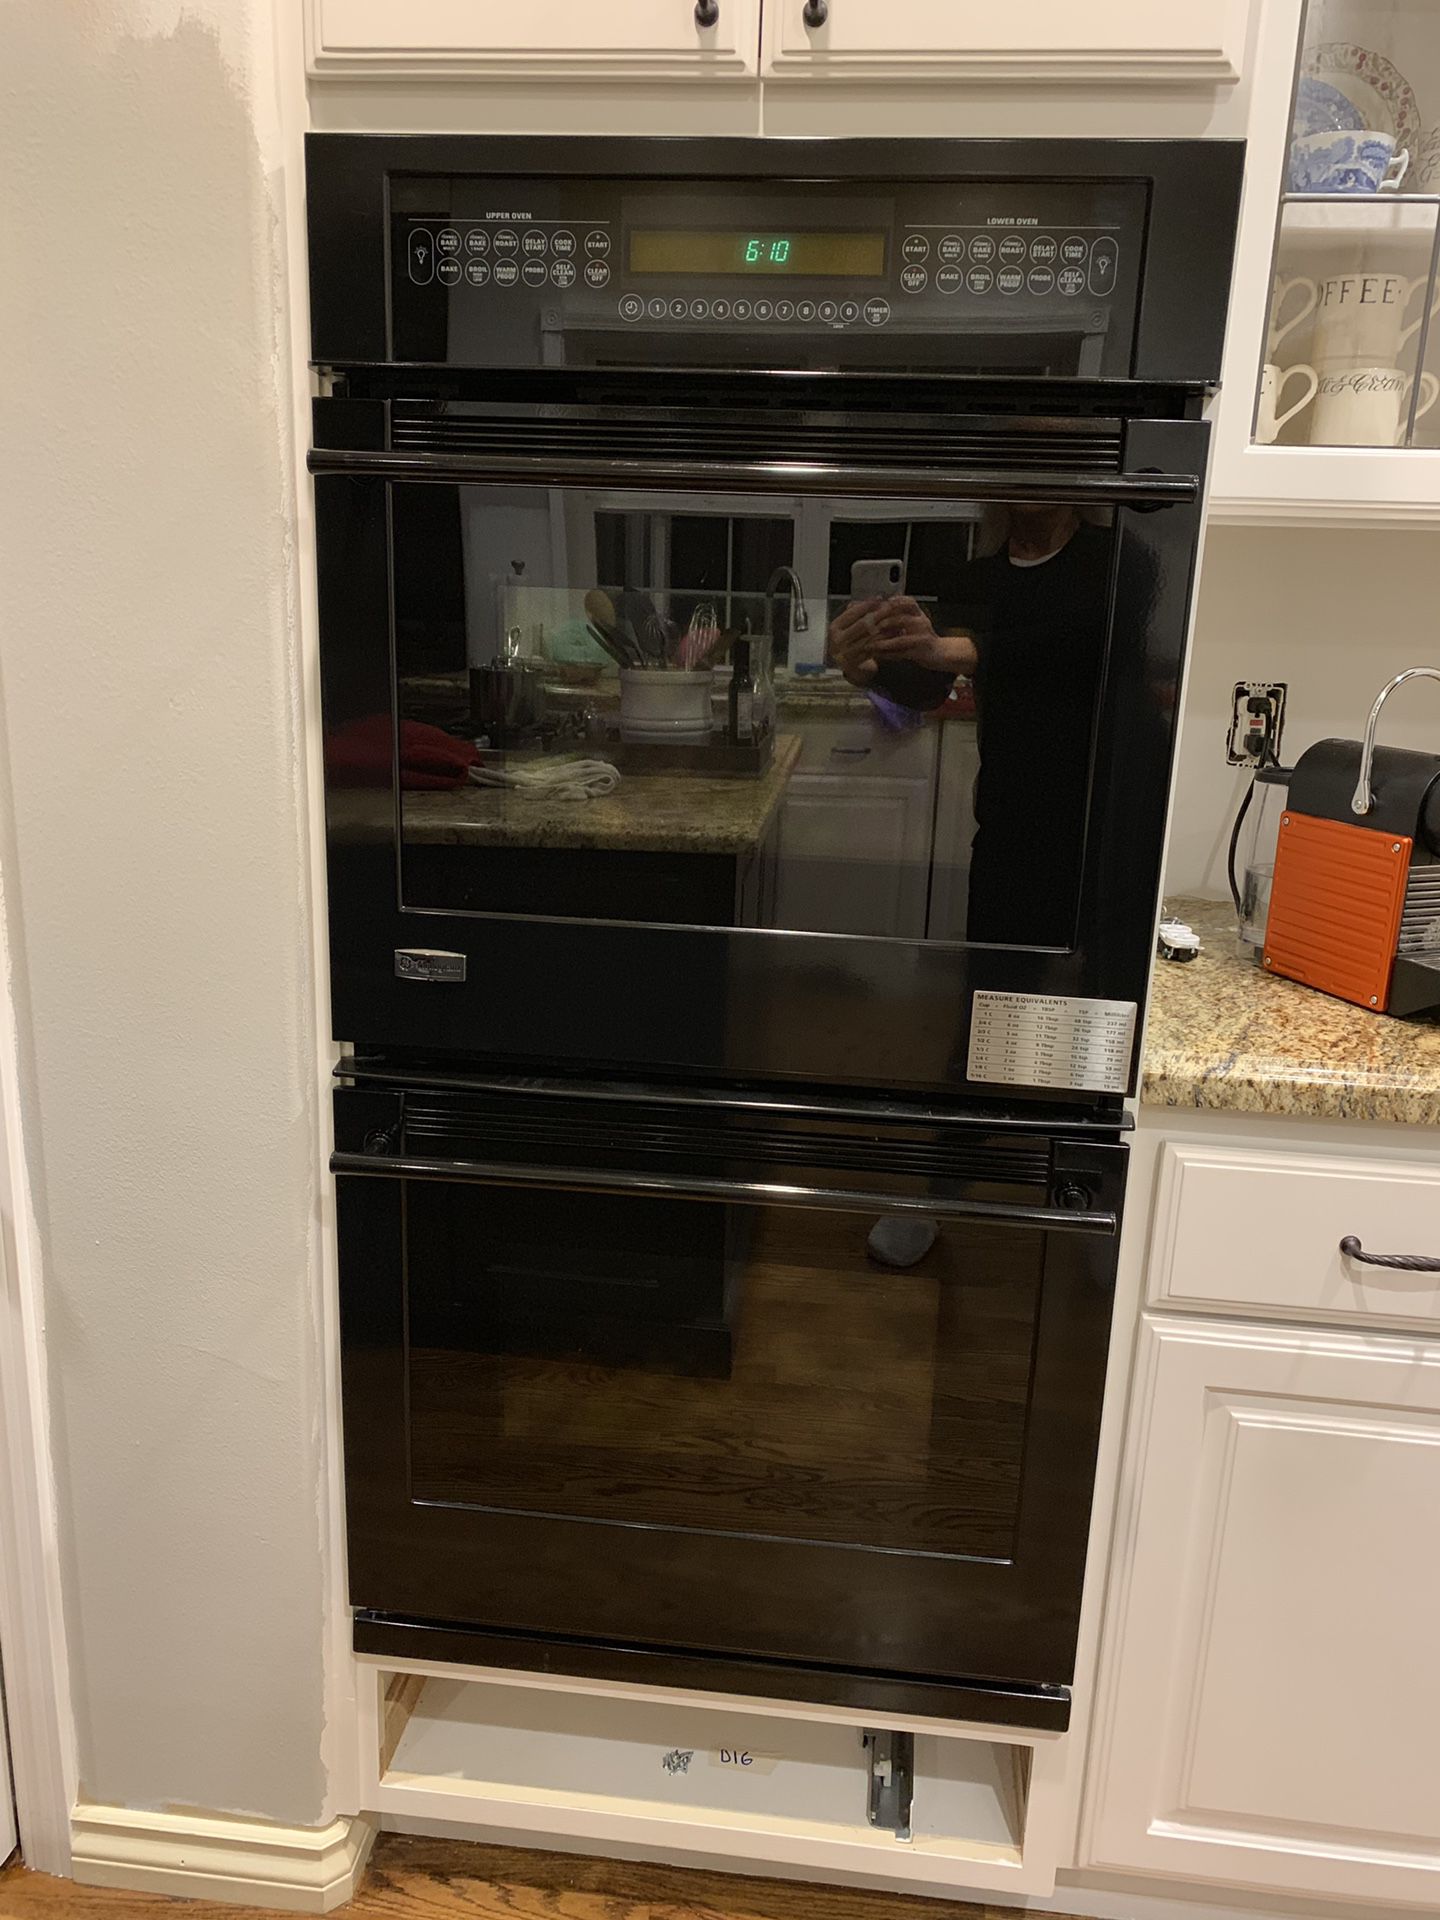 GE Monogram 27” Convection Double Wall Oven